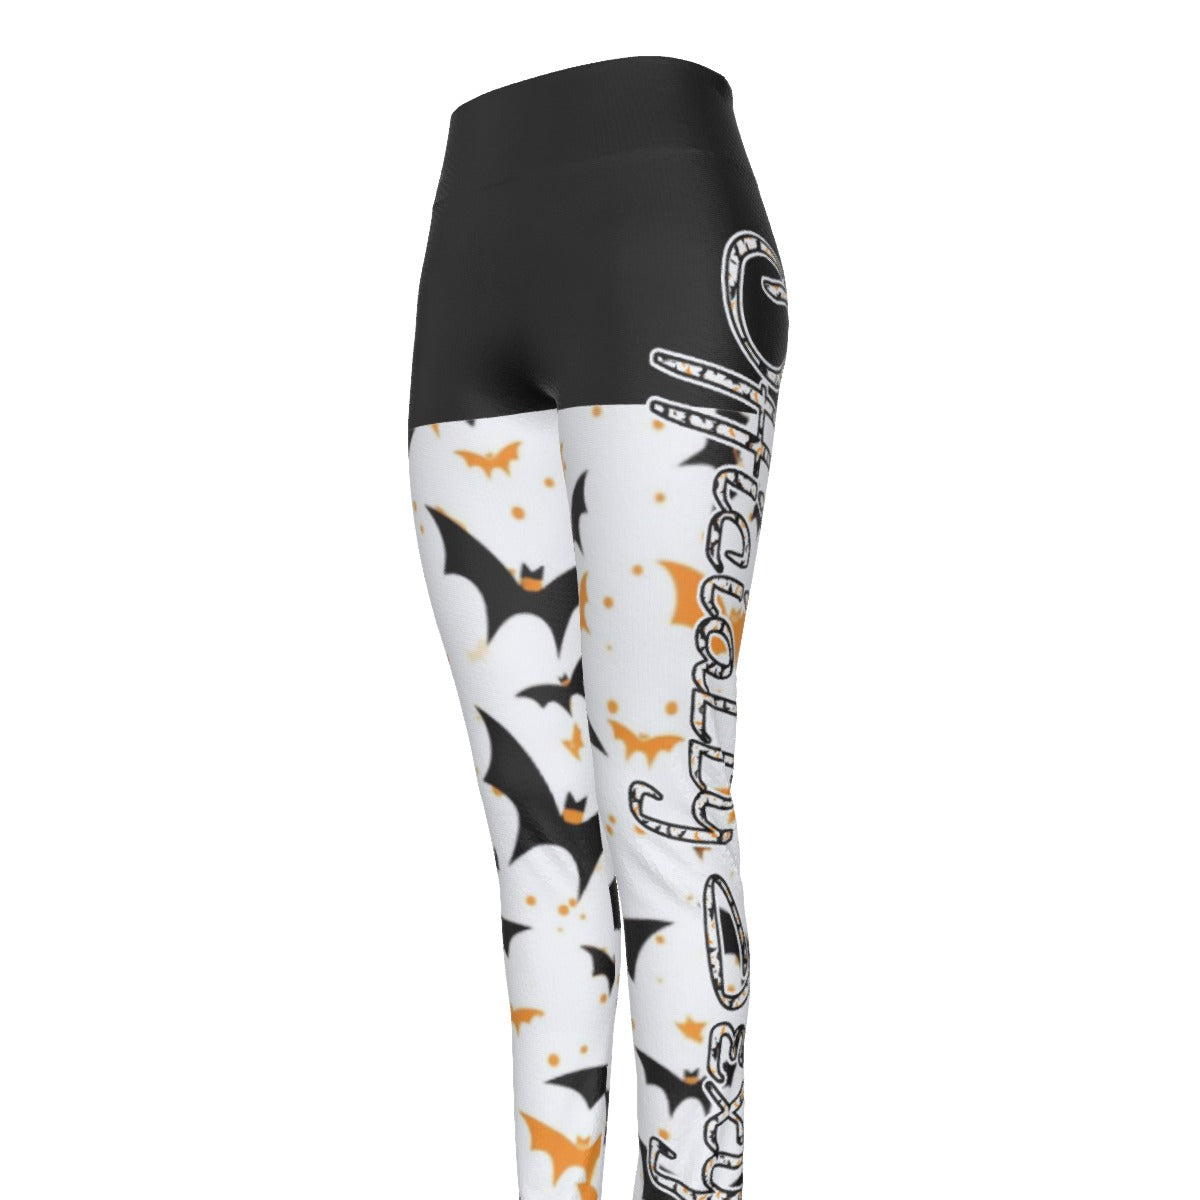 Officially Sexy Halloween Collection Black and Orange Bats Women's Black High Waist Booty Popper Leggings #2 (English) 4